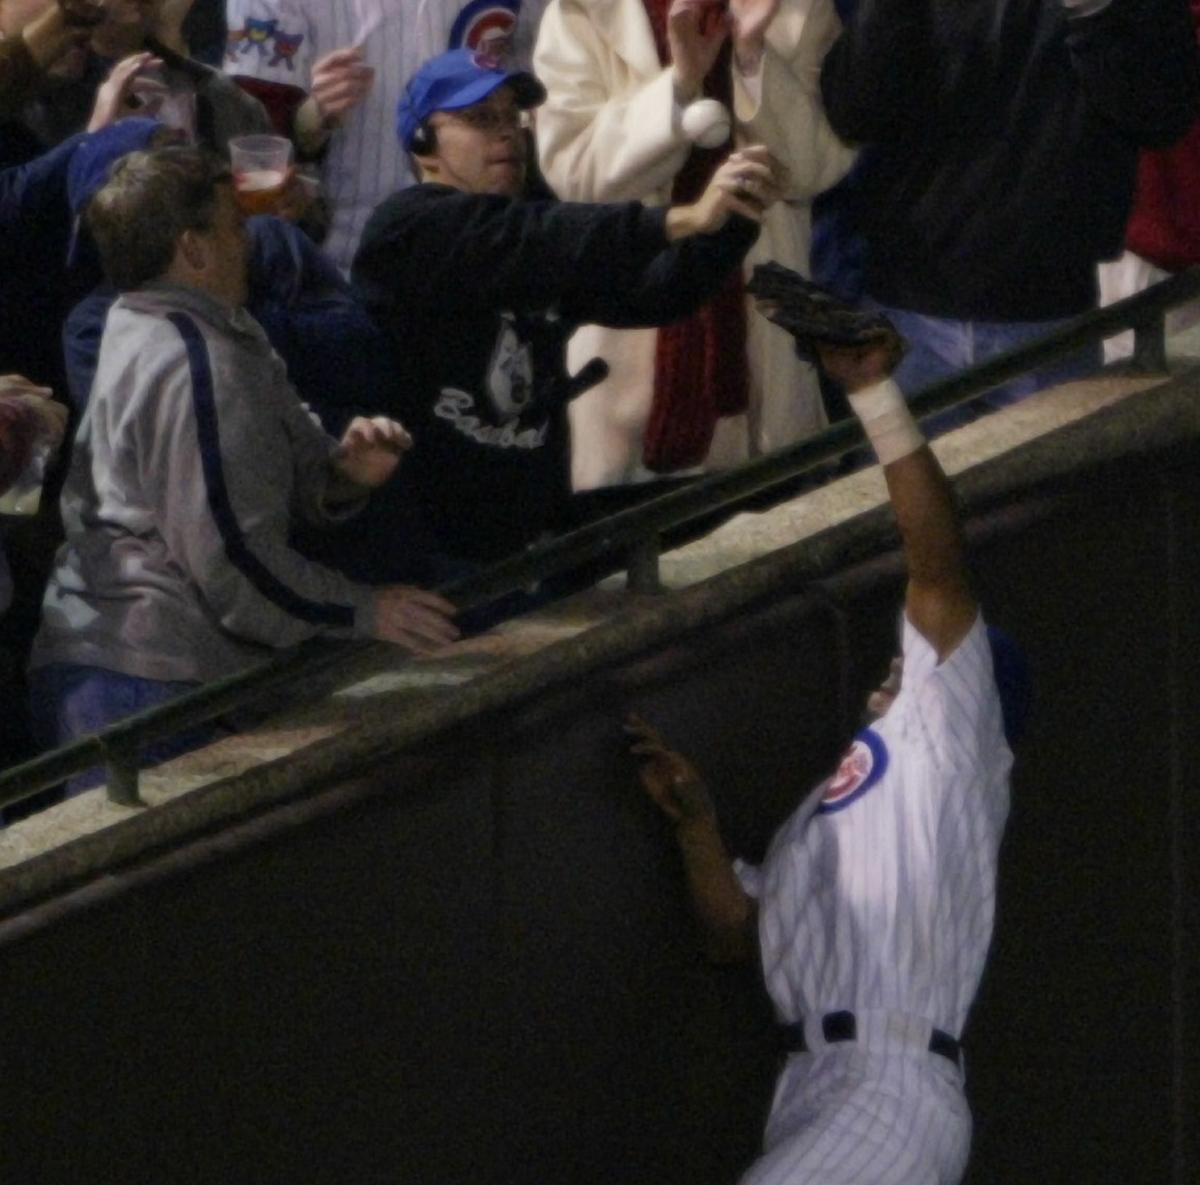 October 14, 2003: The Bartman Game – Society for American Baseball Research